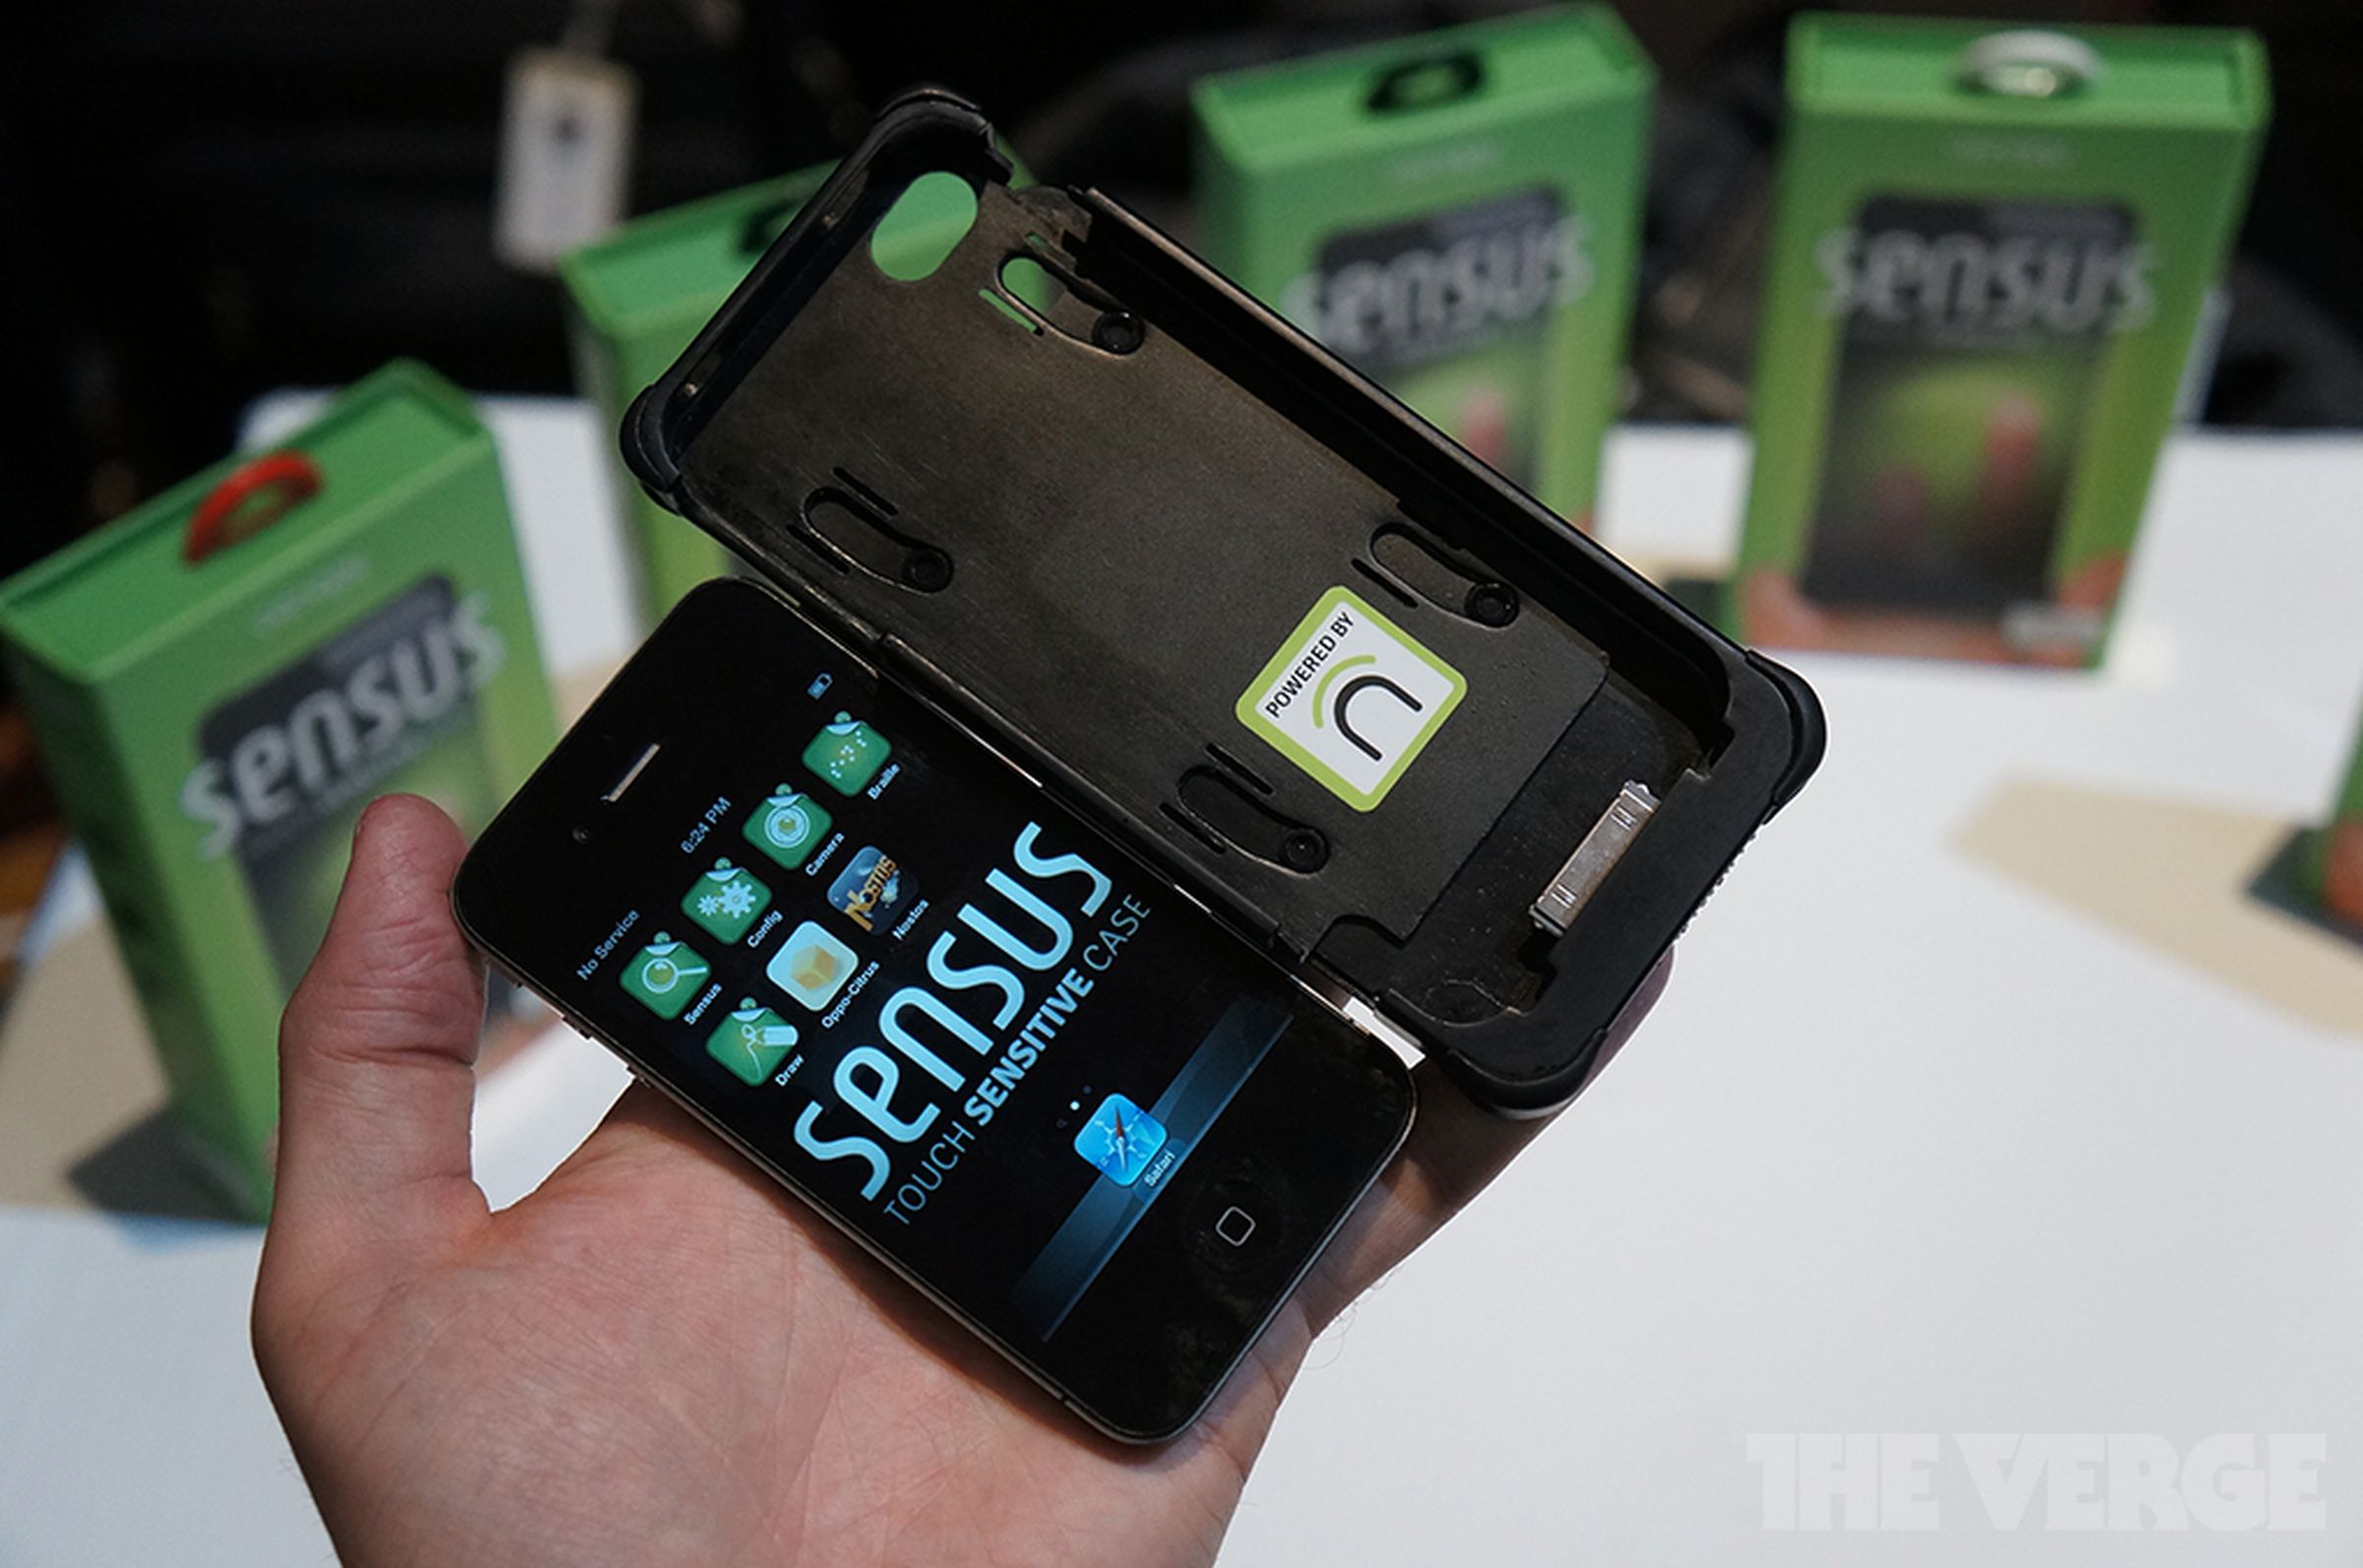 Canopy Sensus touch-enabled iPhone case photos